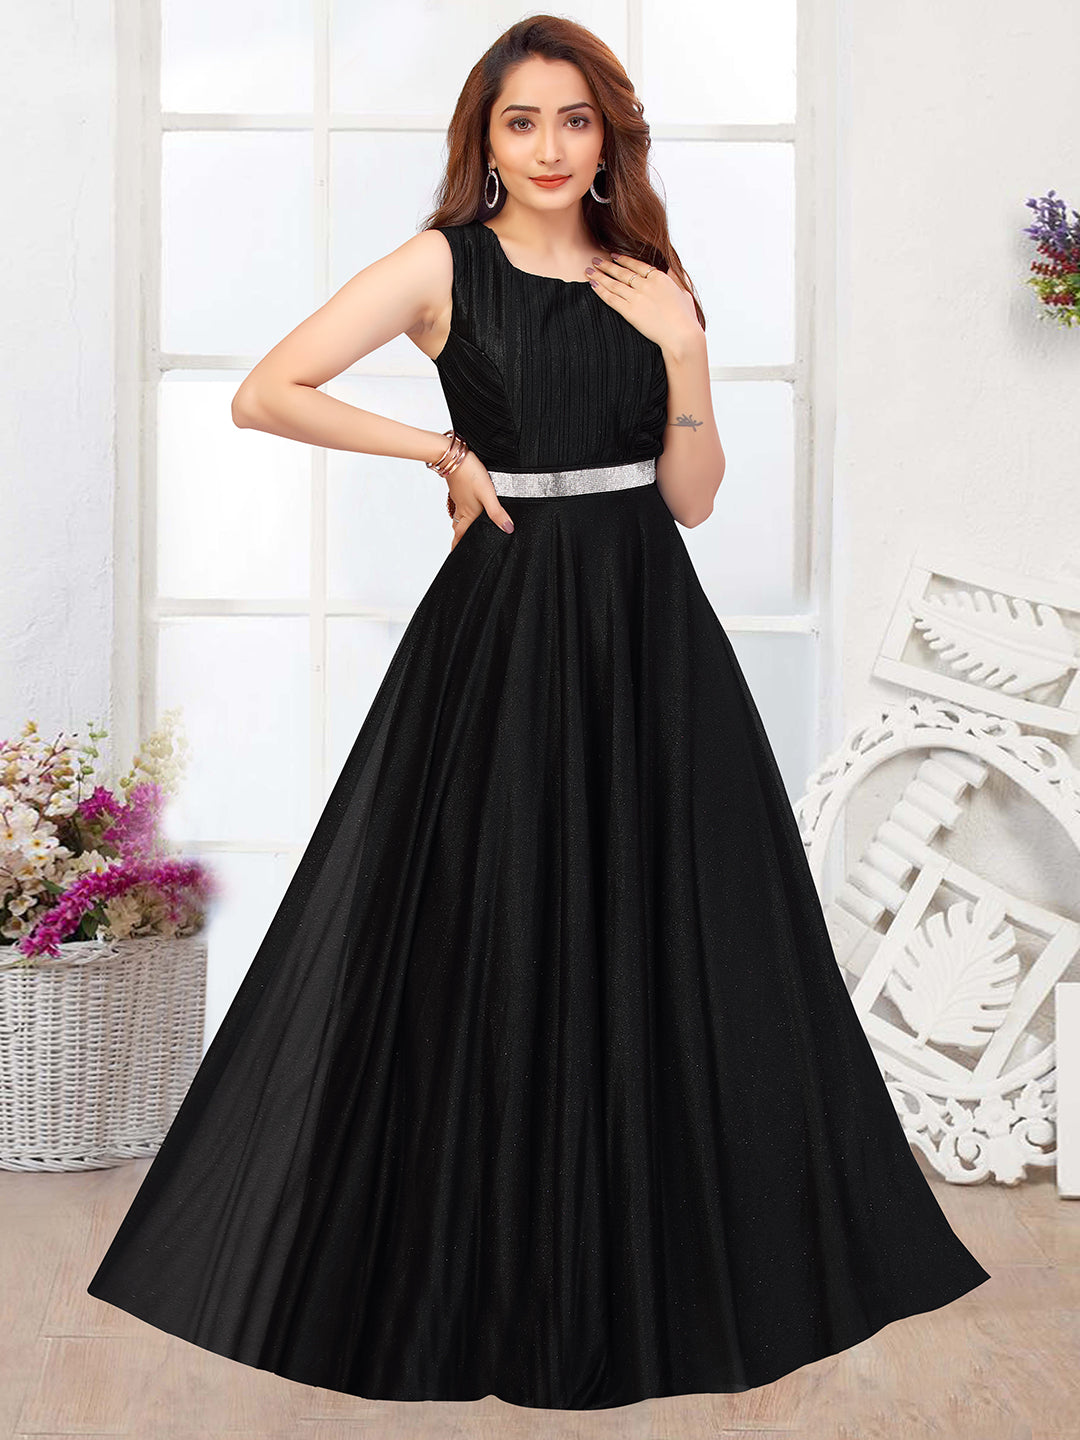 Ambrosia Sequin Embroidered Gown | Black, Round, Full | Embroidered gown,  Fashion, Gowns